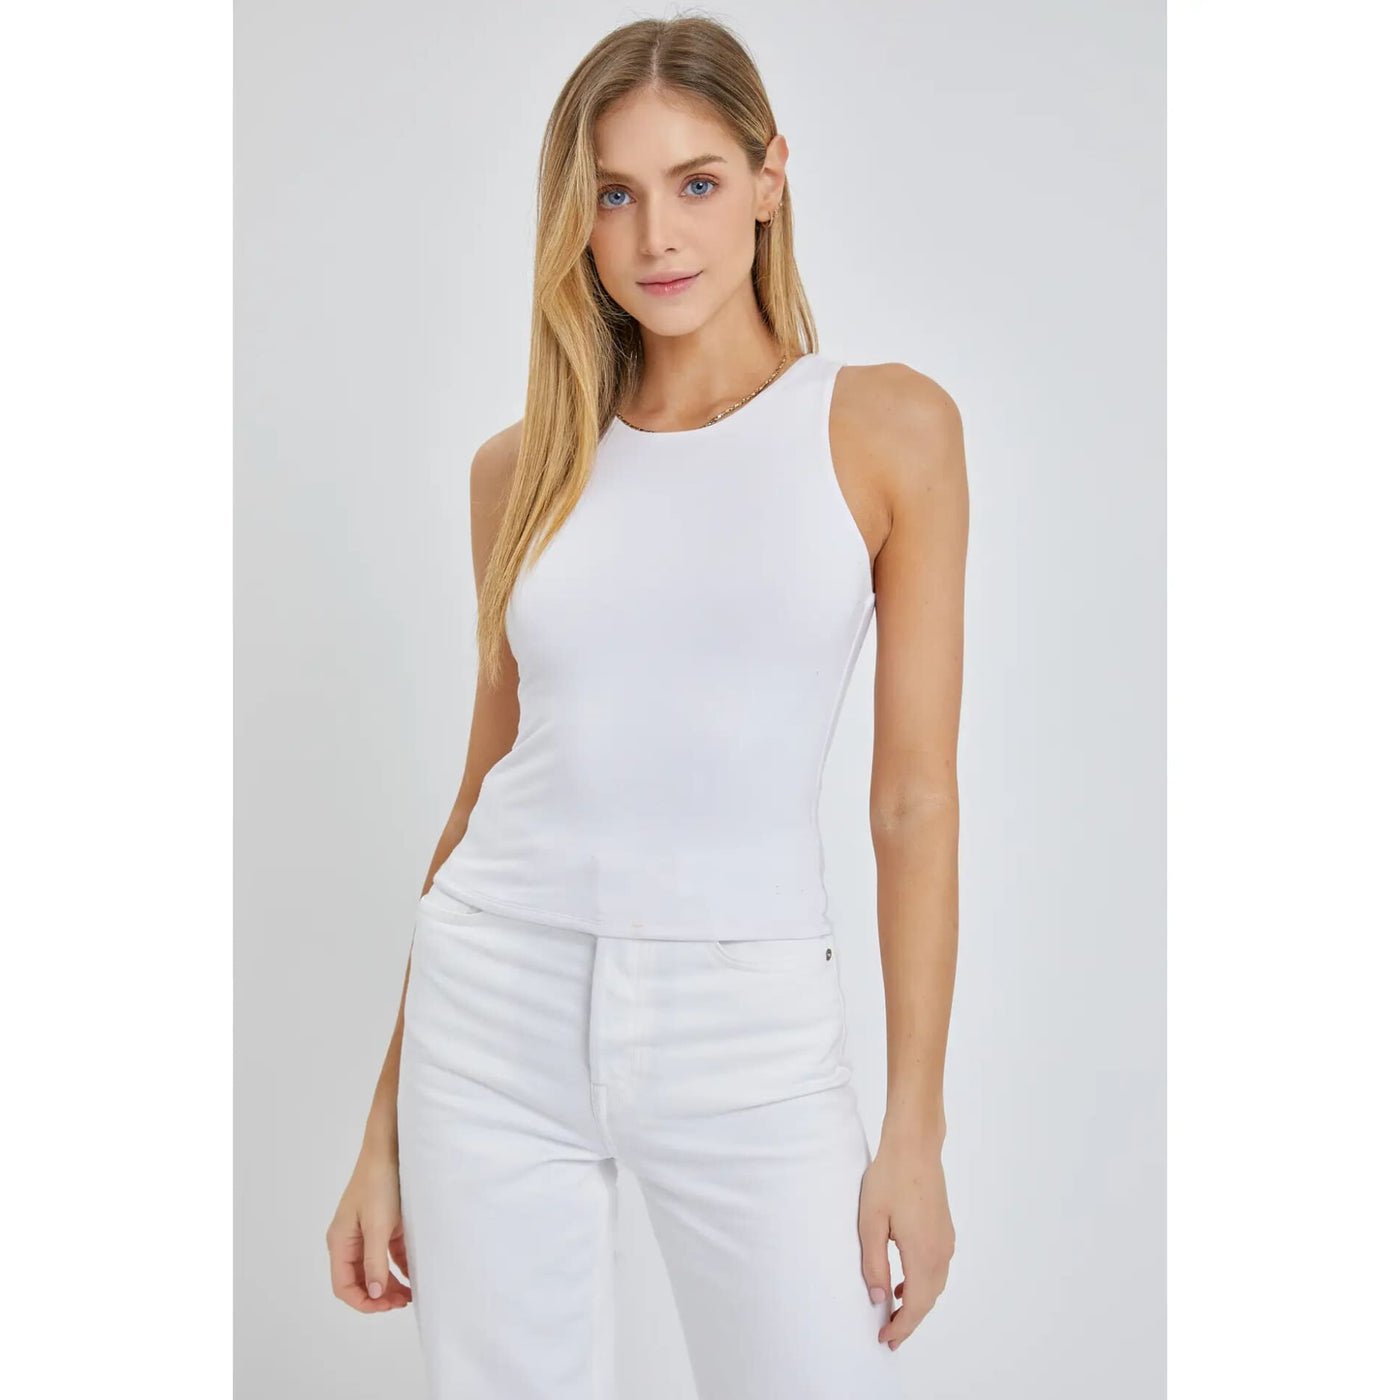 This Is It Tank - S / White - 180 Basics